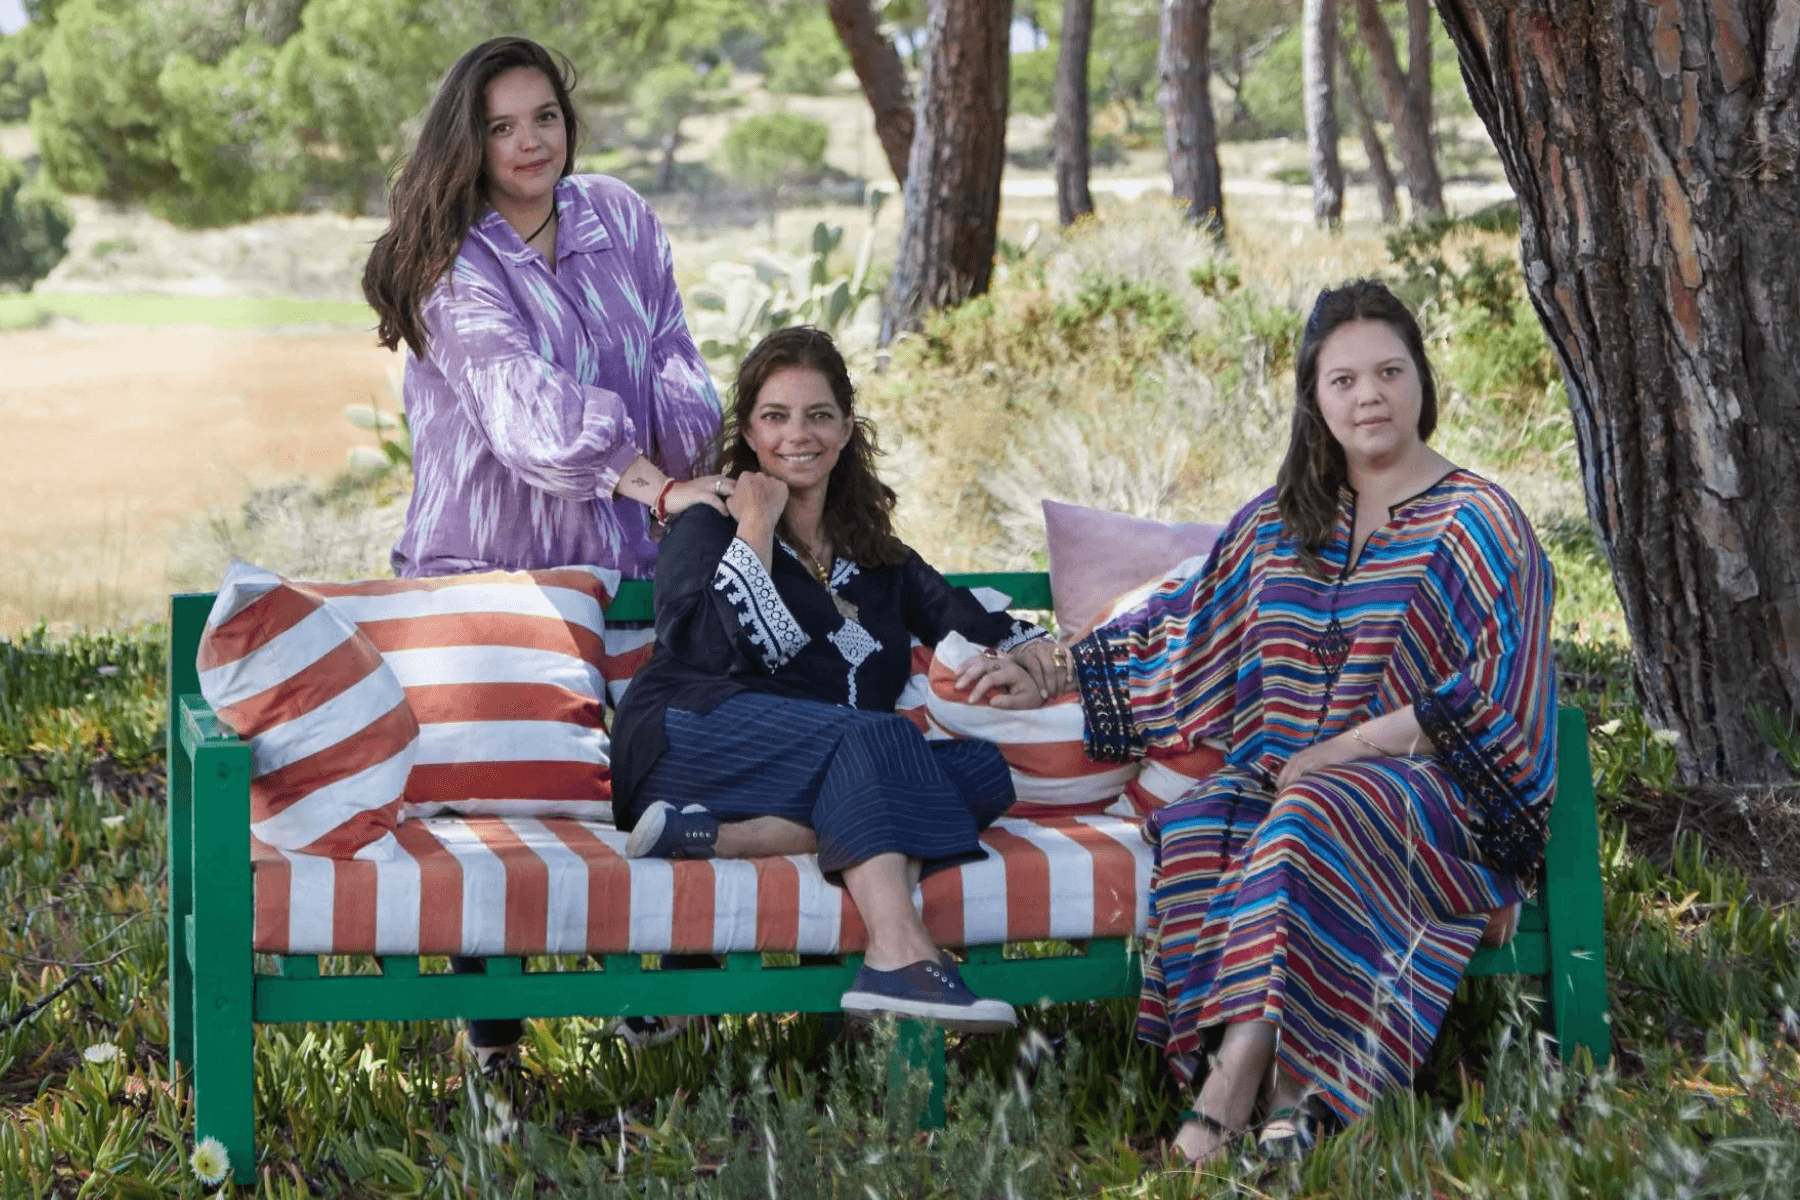 Carolina Irving, Ariadne Irving, and Olympia Irving relaxing on an outdoor bench